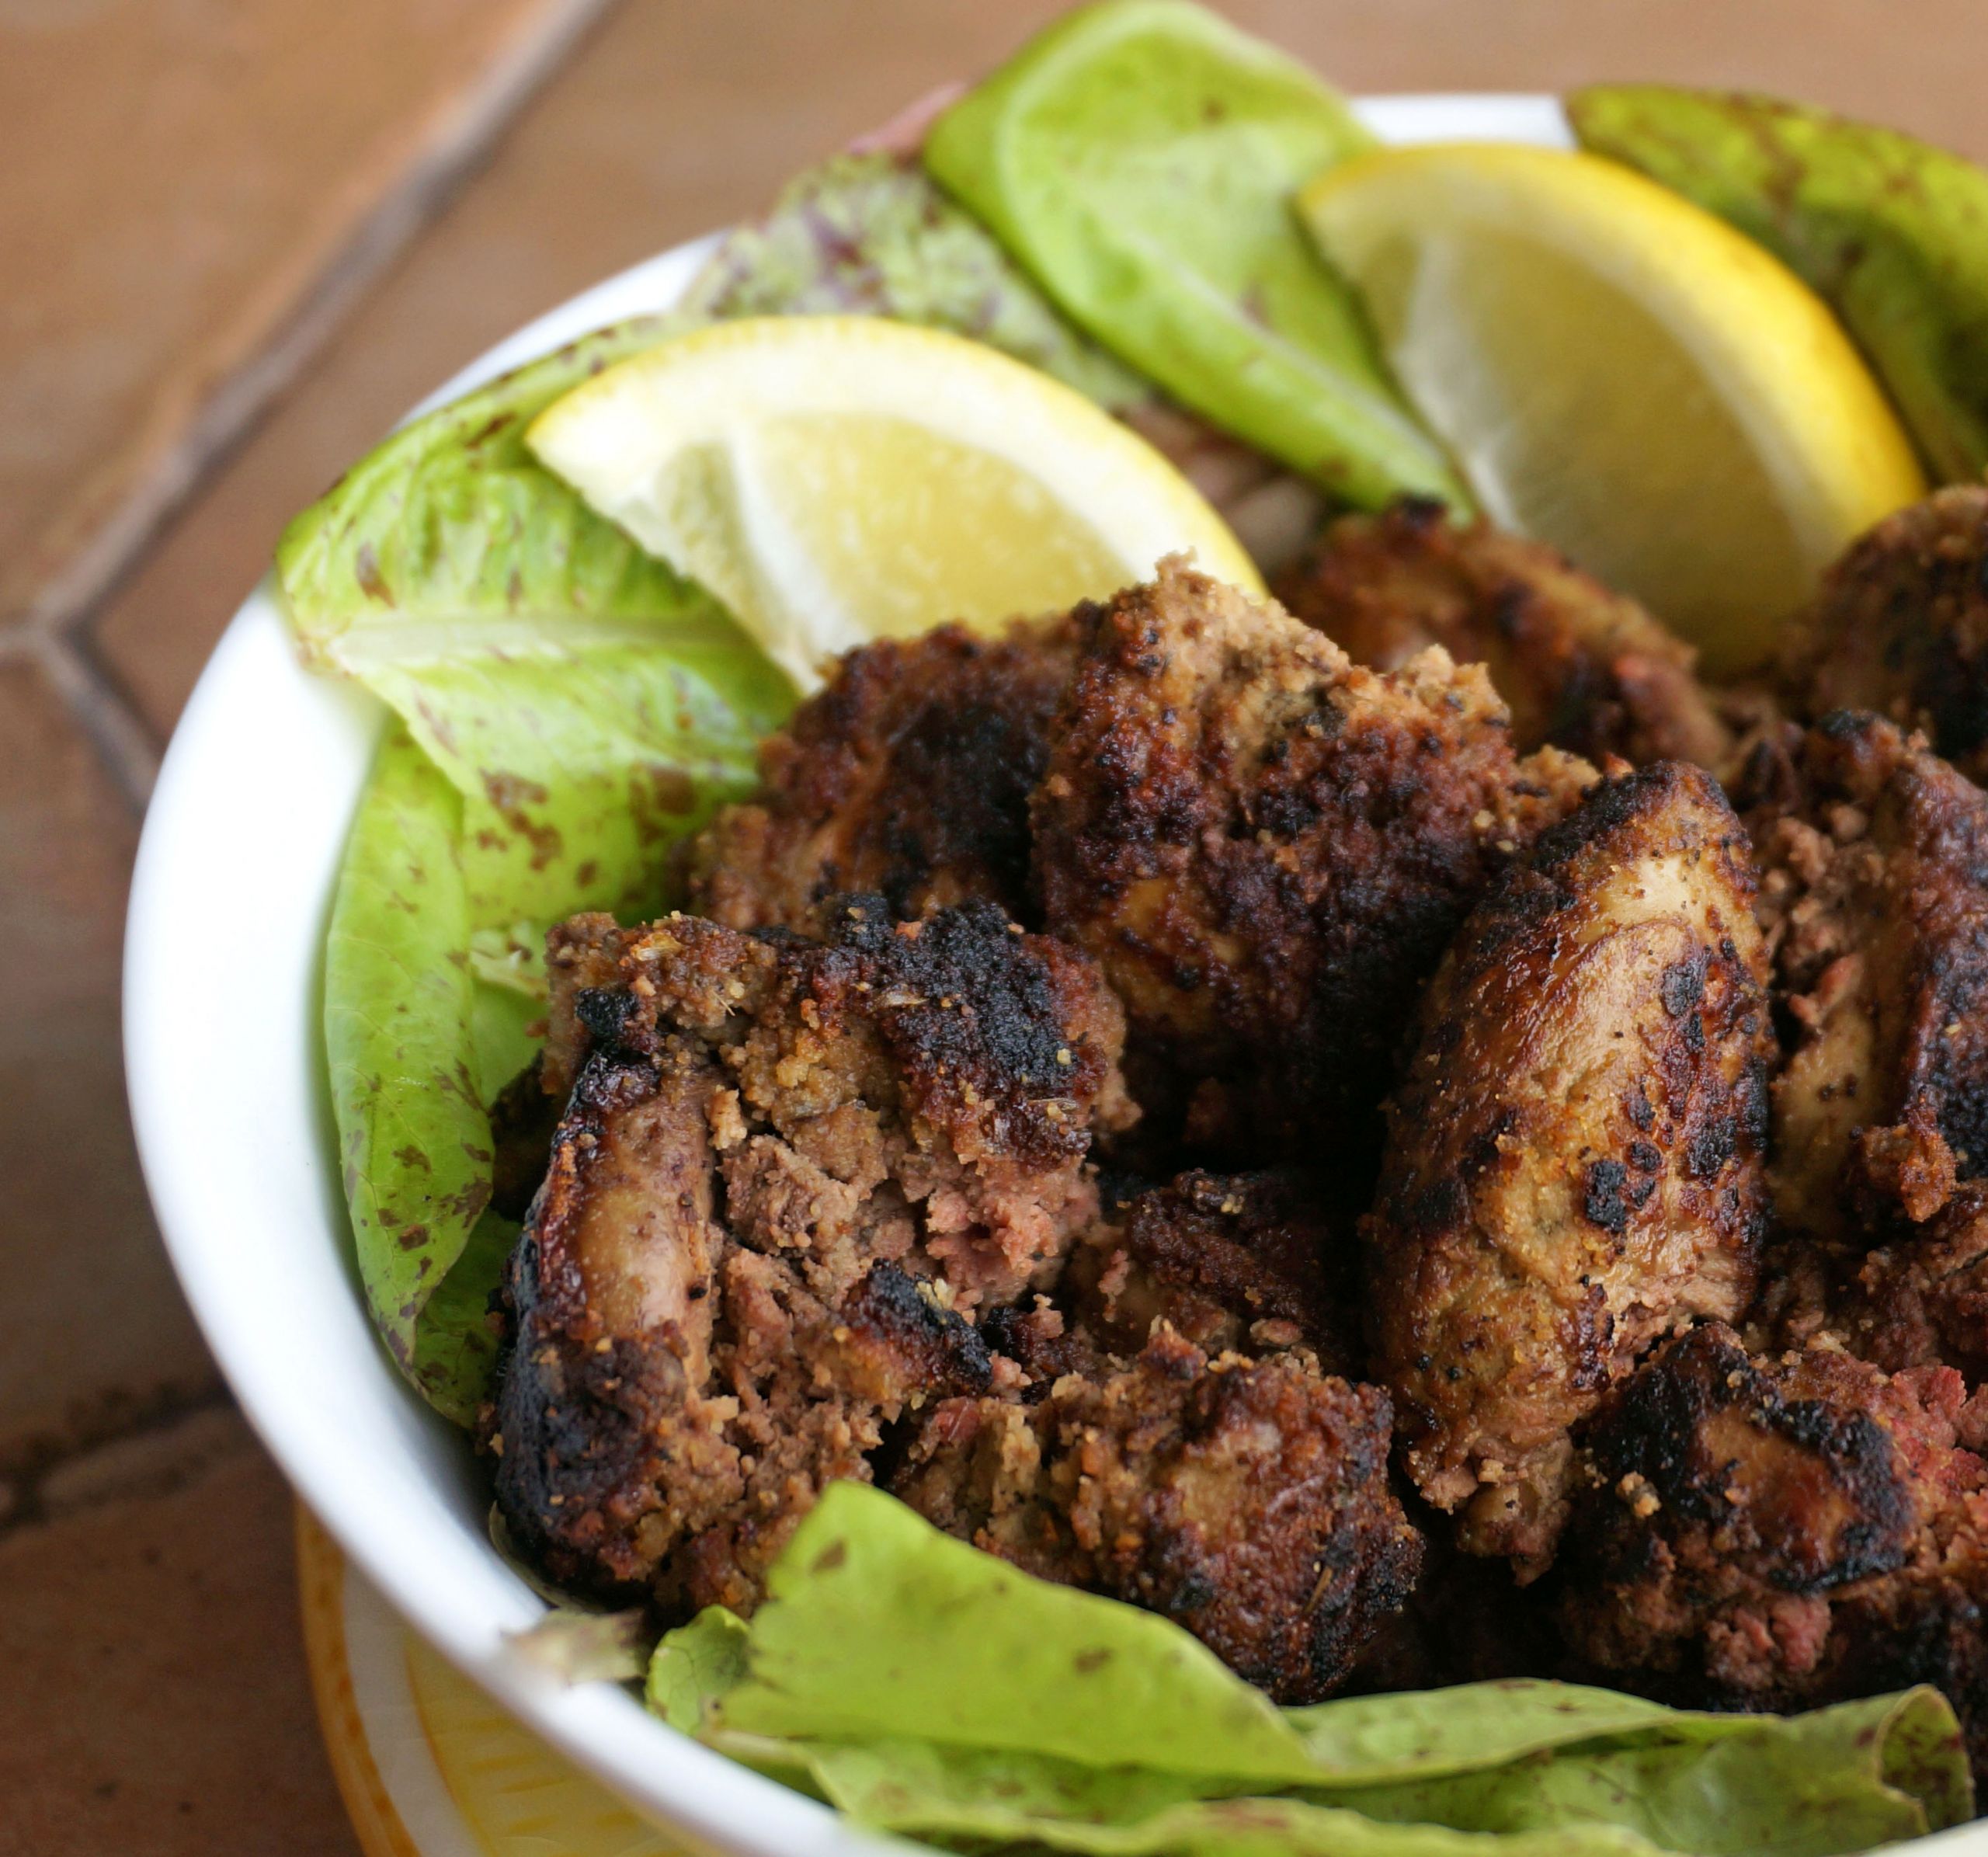 Fried Chicken Liver Recipes
 Garlic Fried Chicken Livers Paleo AIP Whole30 21dsd